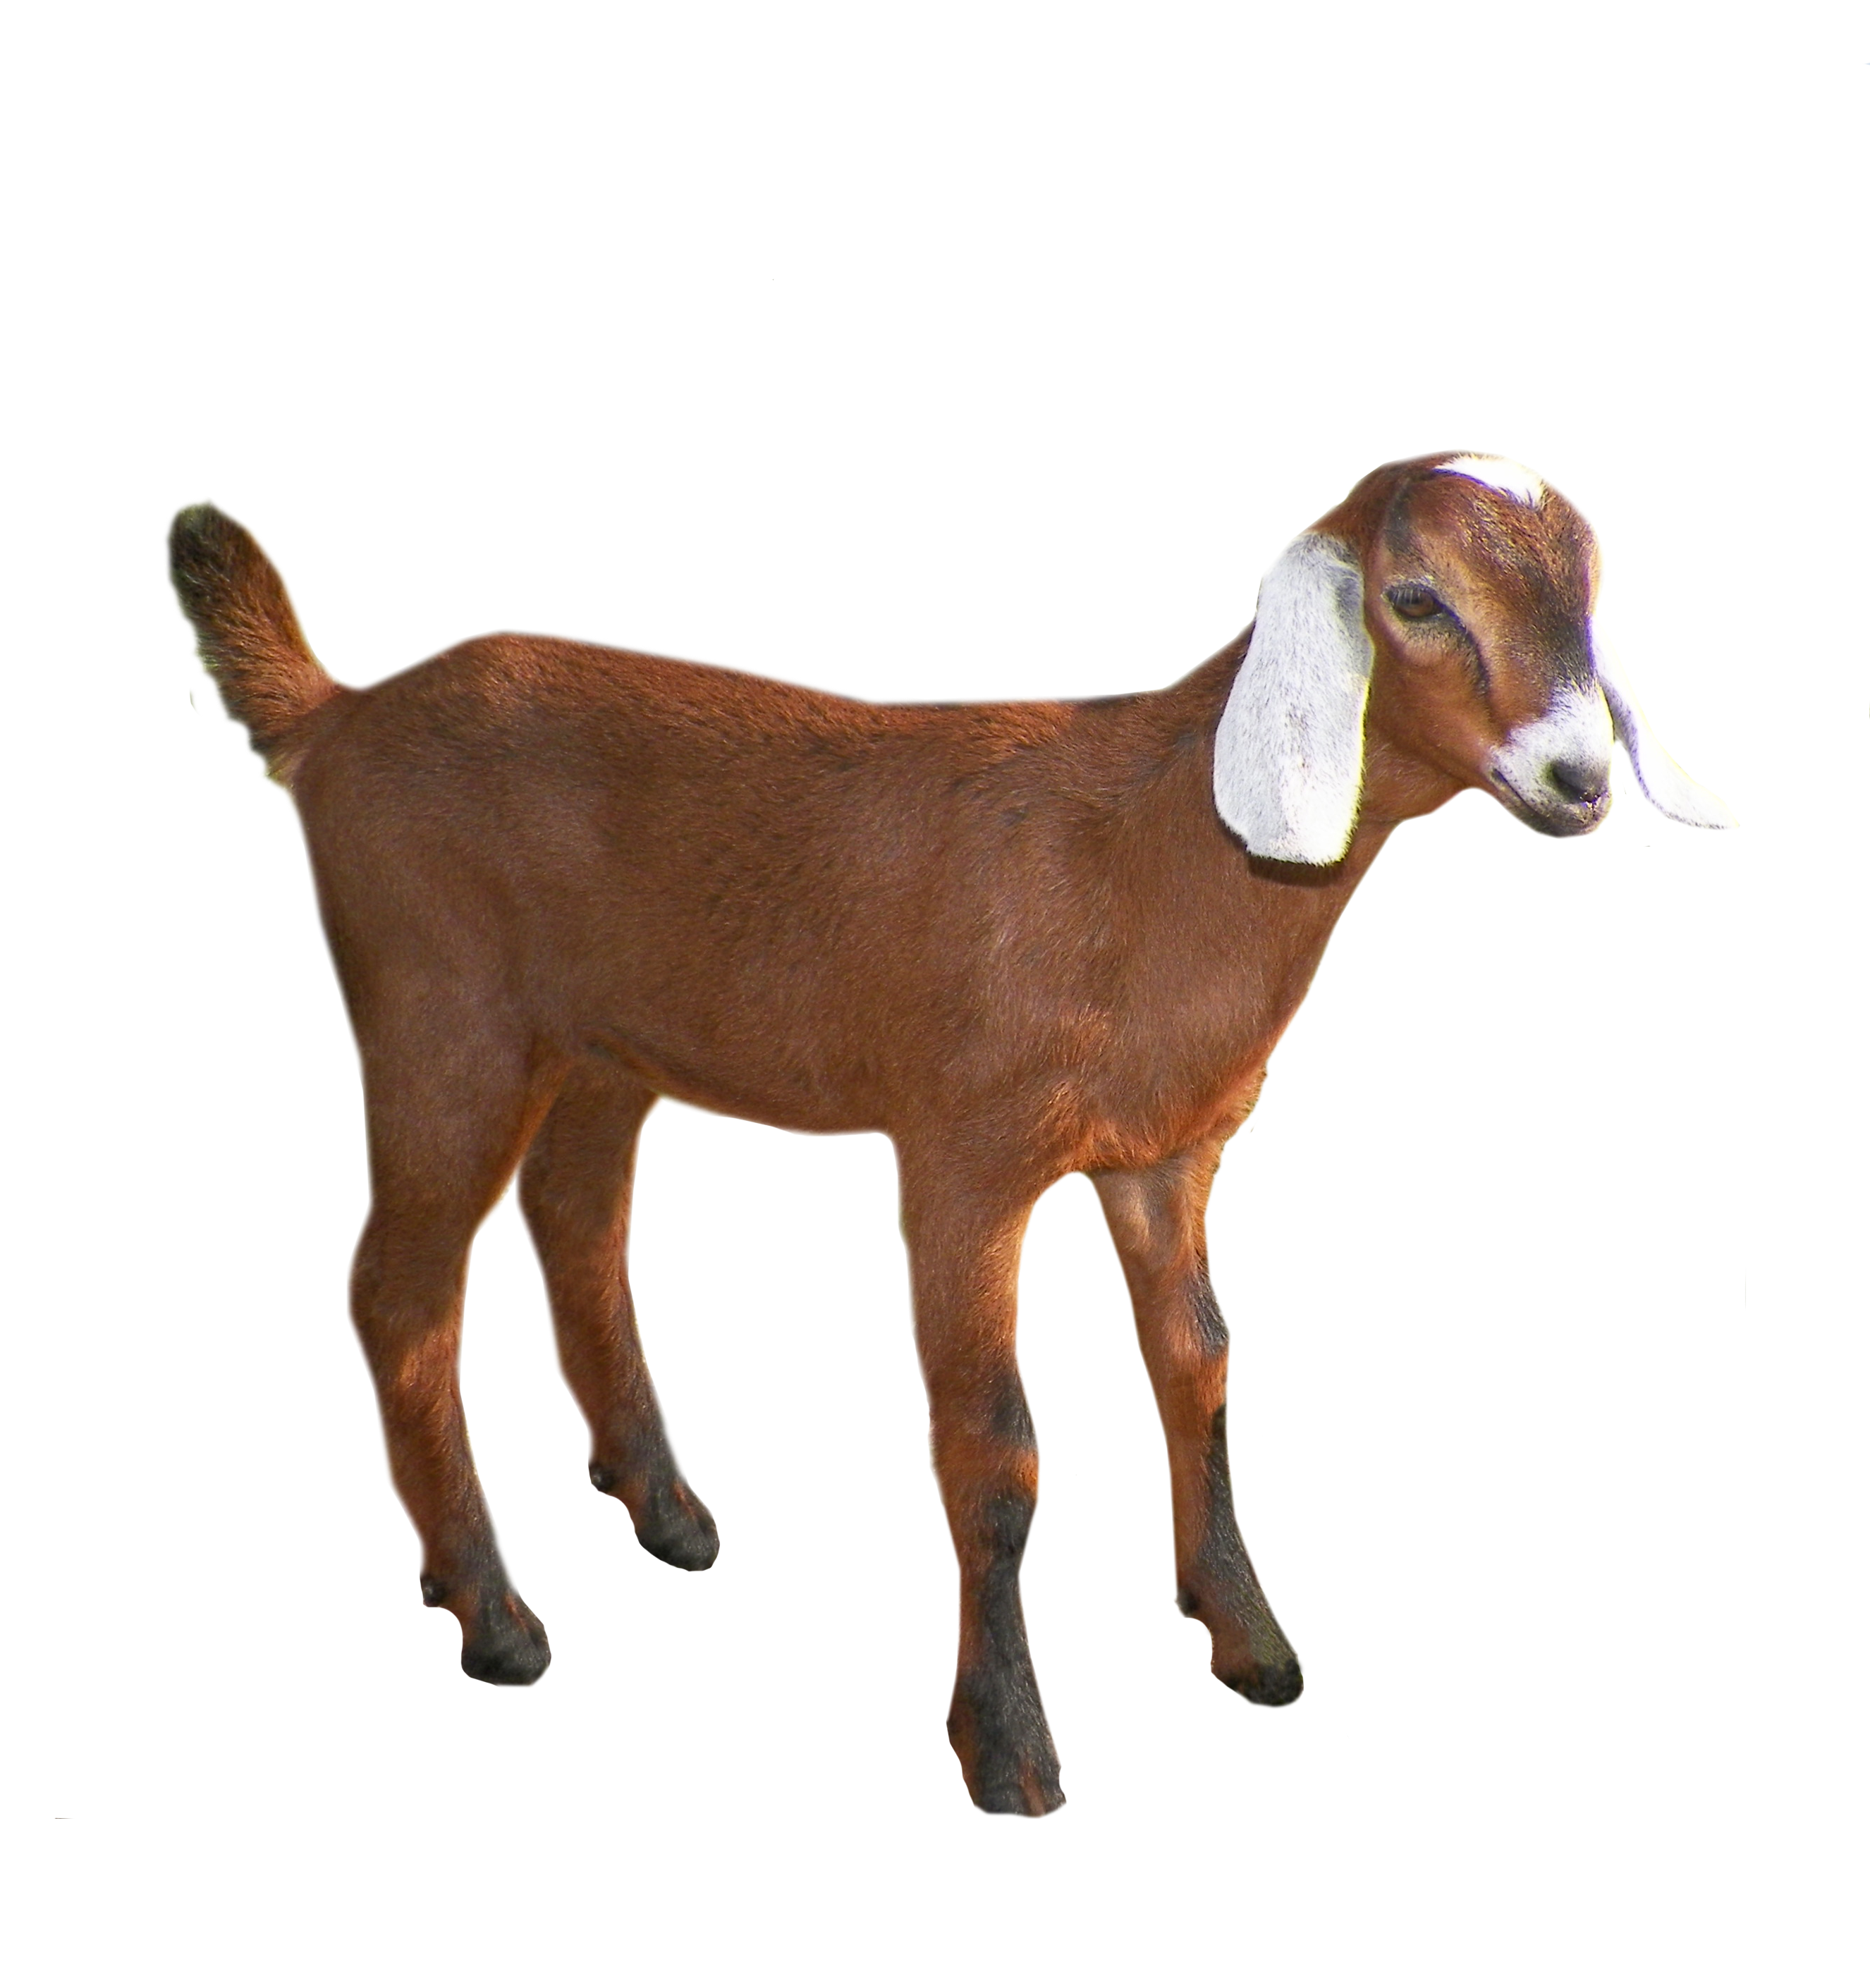 Png images free download. Goat clipart female goat